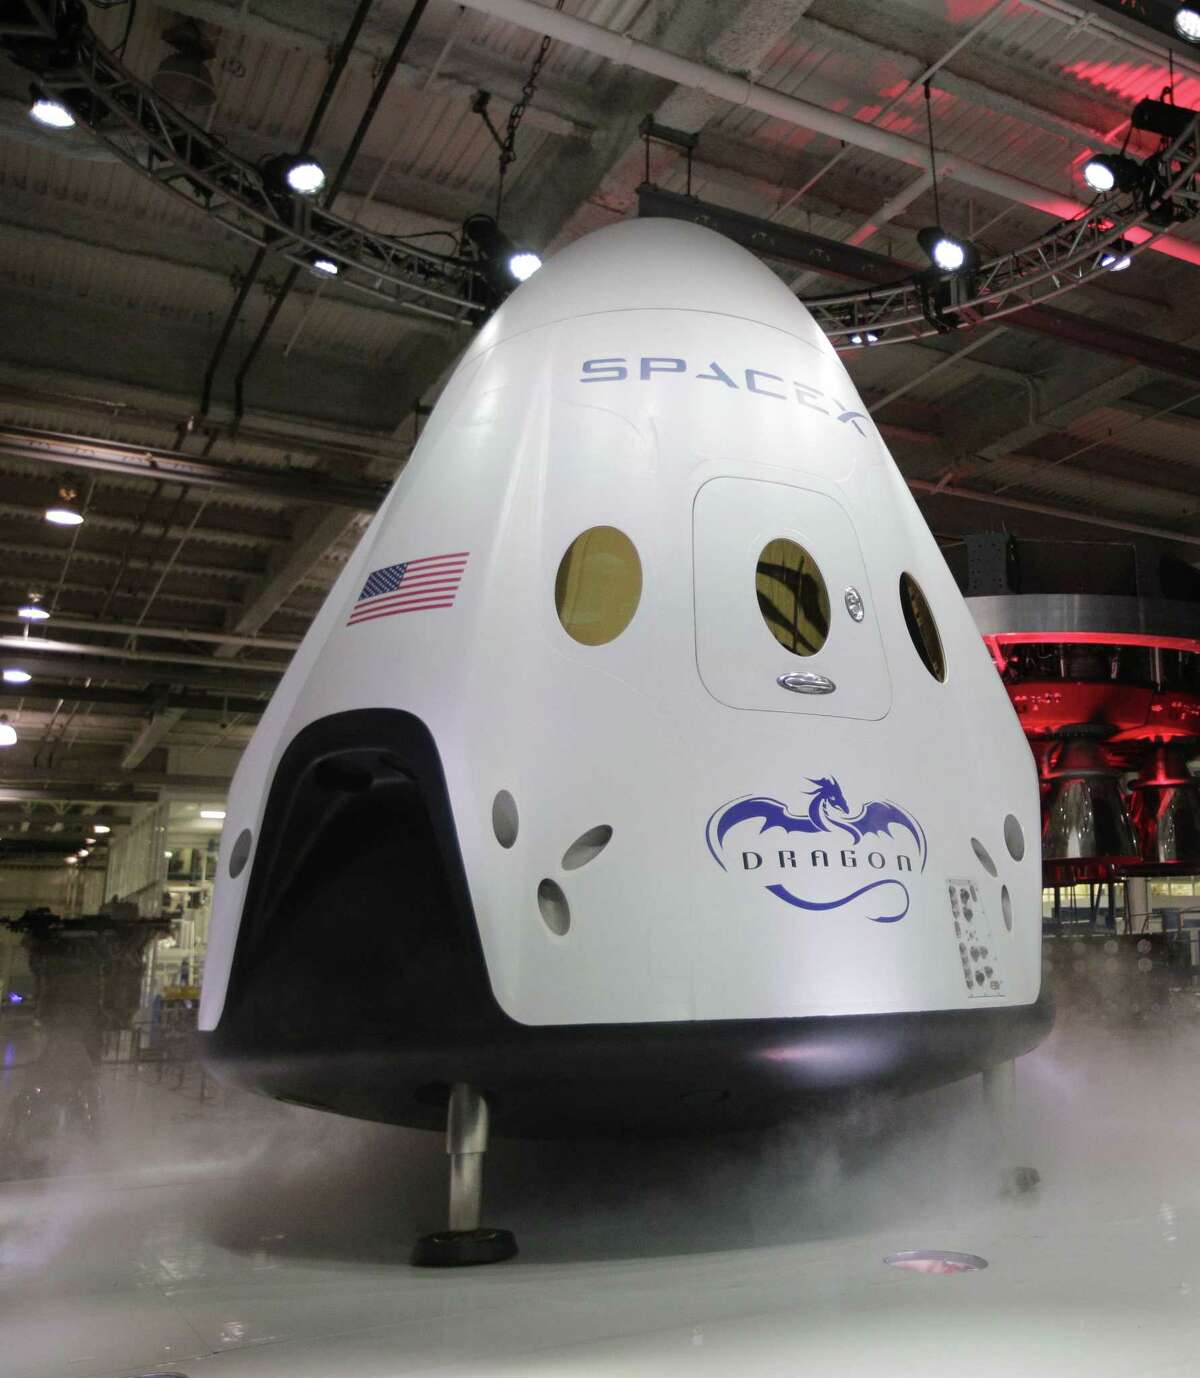 In this May 29, 2014 photo, the SpaceX Dragon V2 spaceship is unveiled at its headquarters in Hawthorne, Calif.